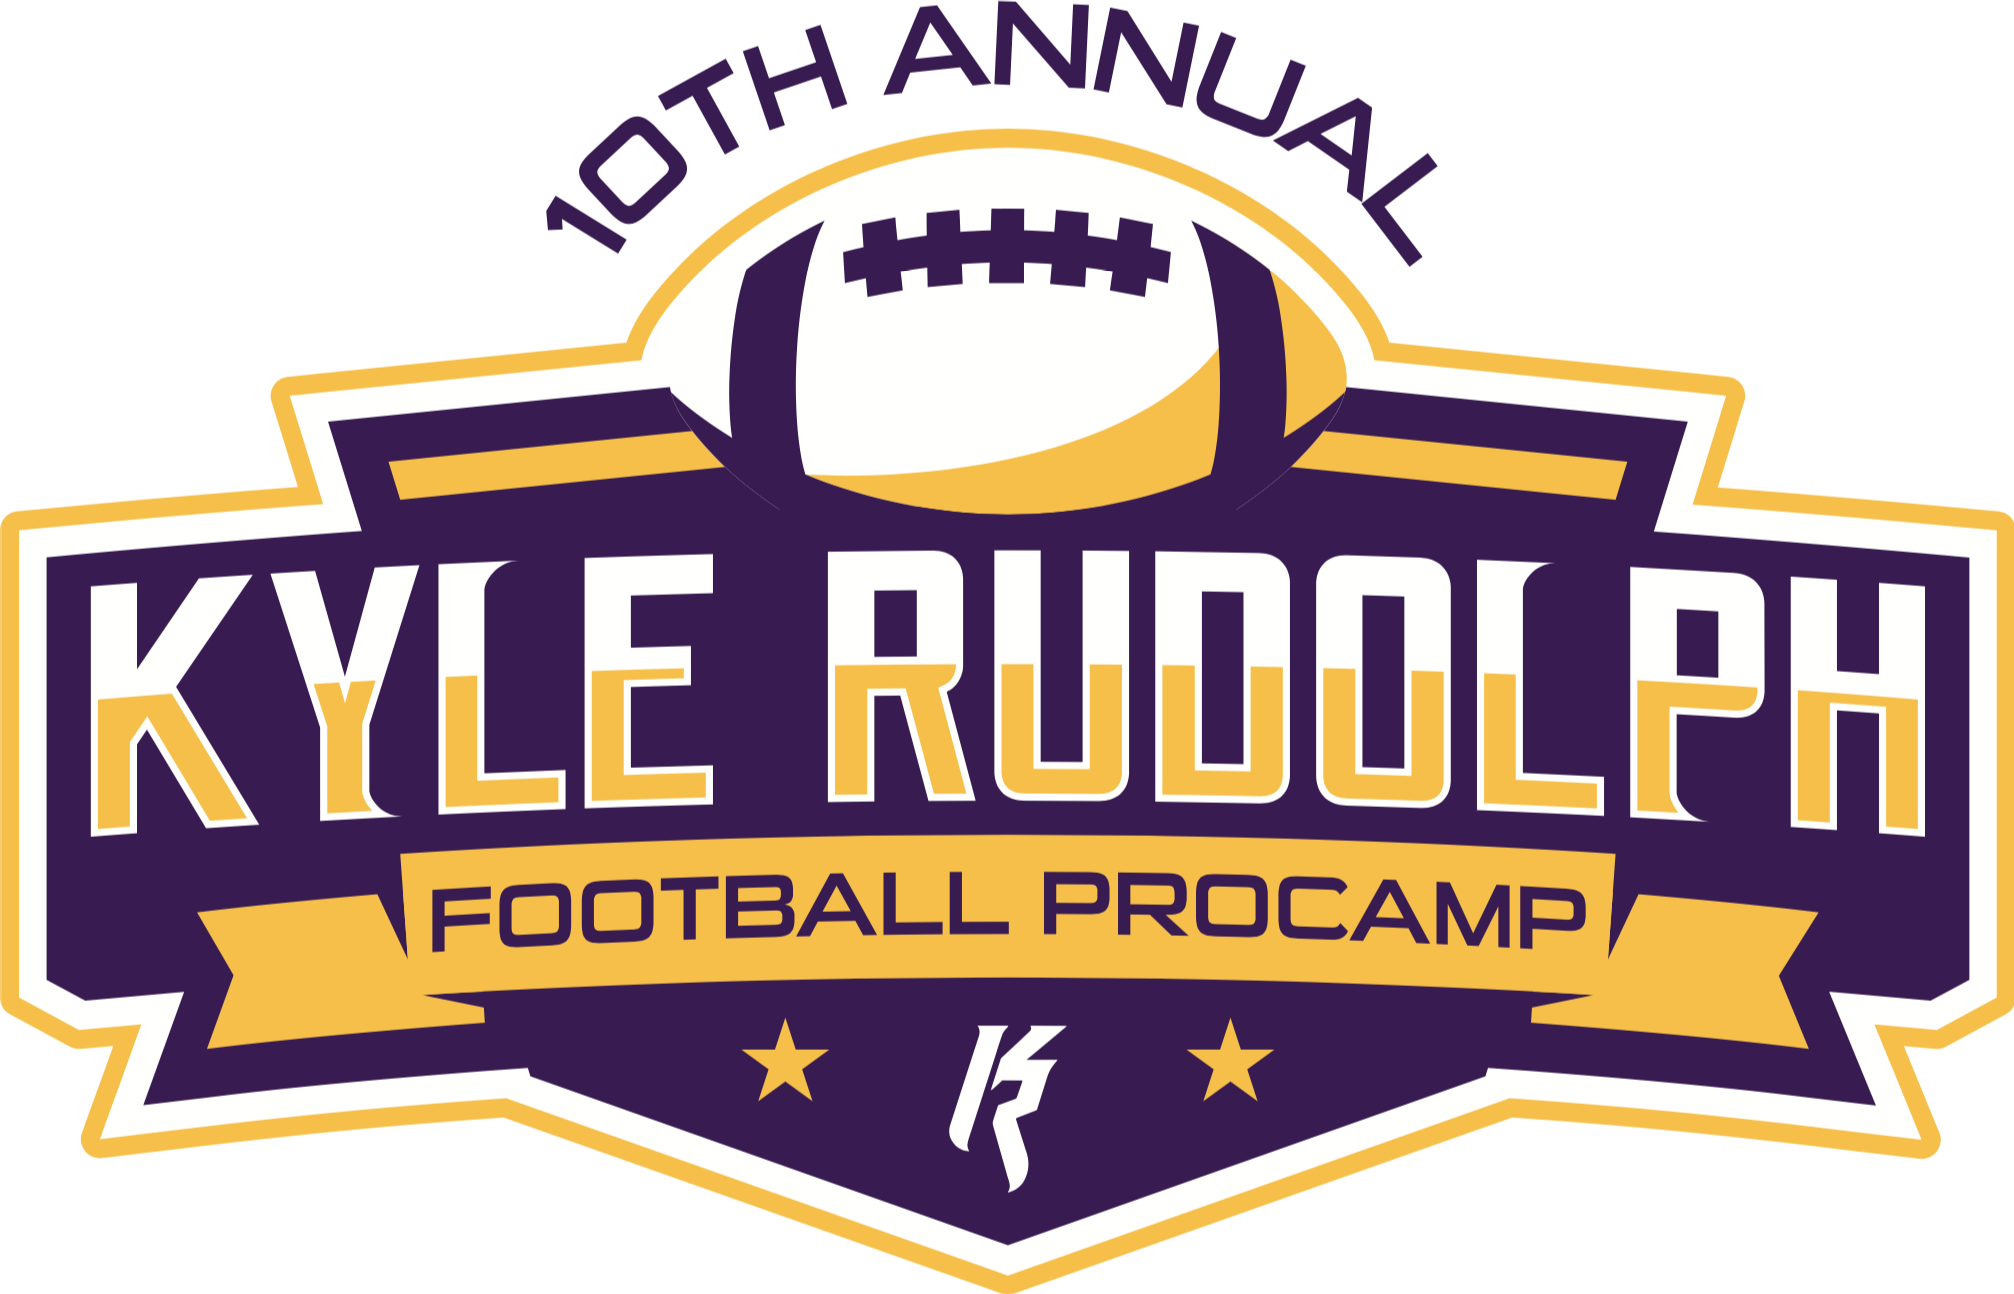 ProCamps - 10th Annual Kyle Rudolph Football ProCamp Logo